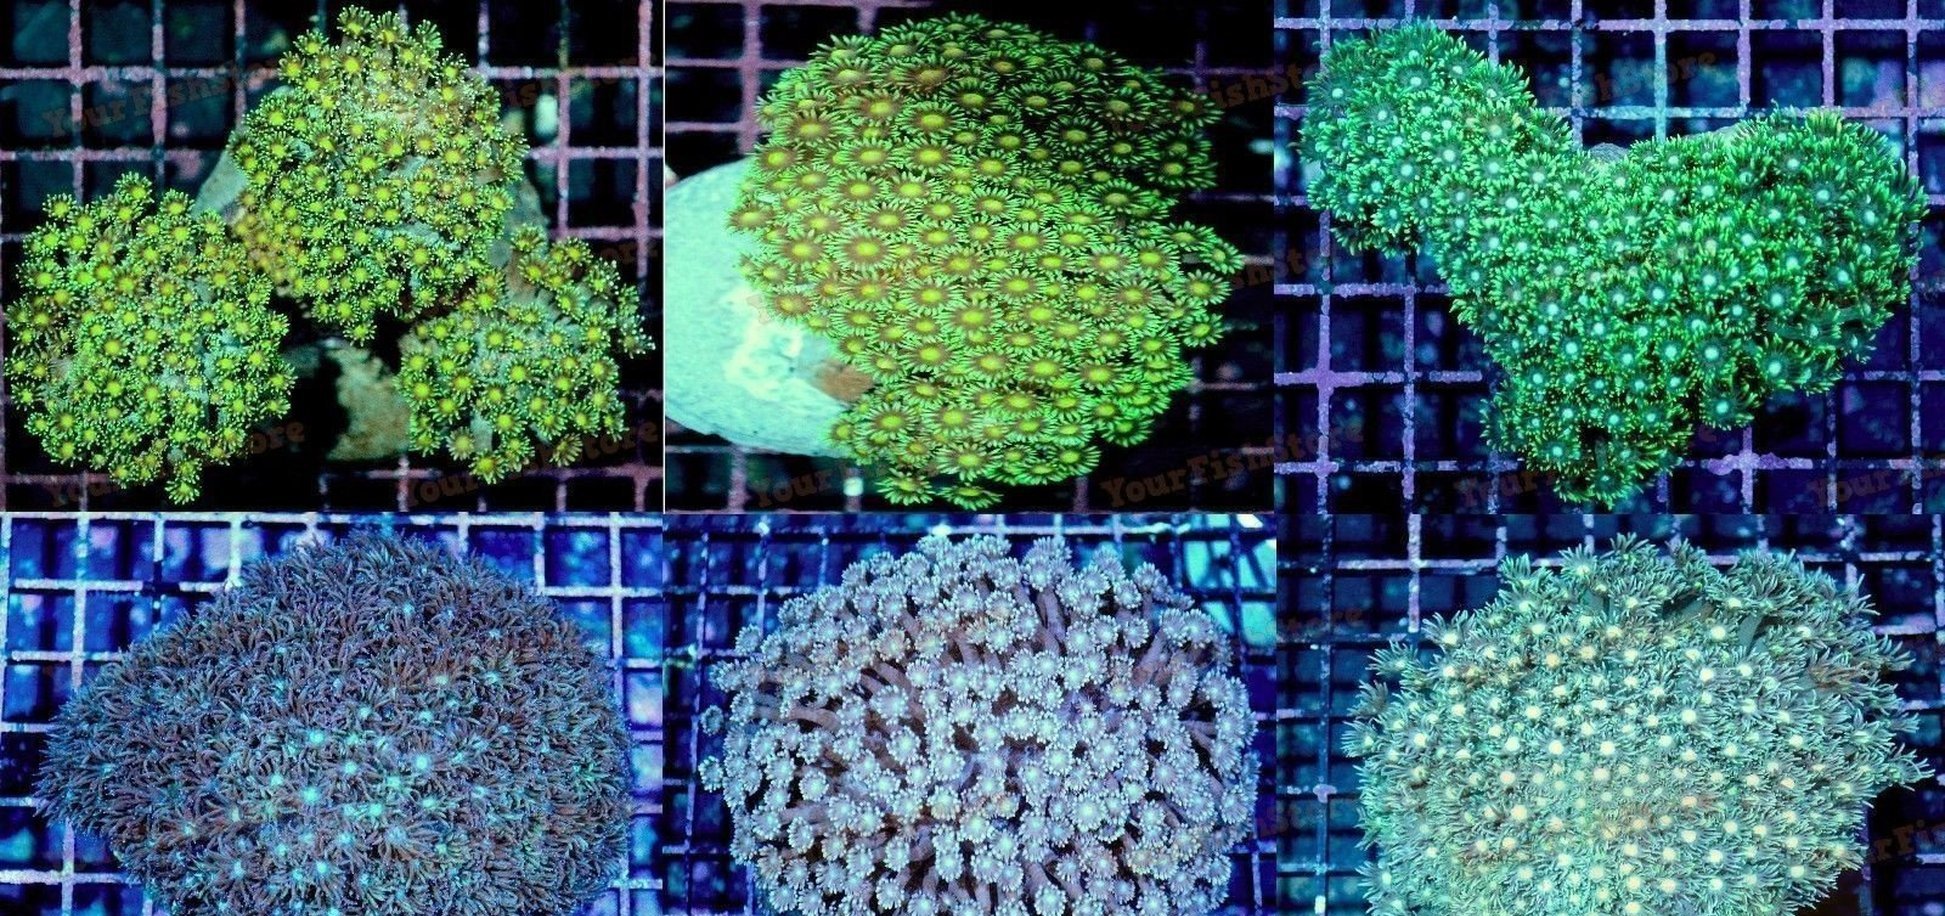 X2 Assorted Goniopora Coral Med - Flower Pot Coral - Live Lps Sps-frag packages-www.YourFishStore.com